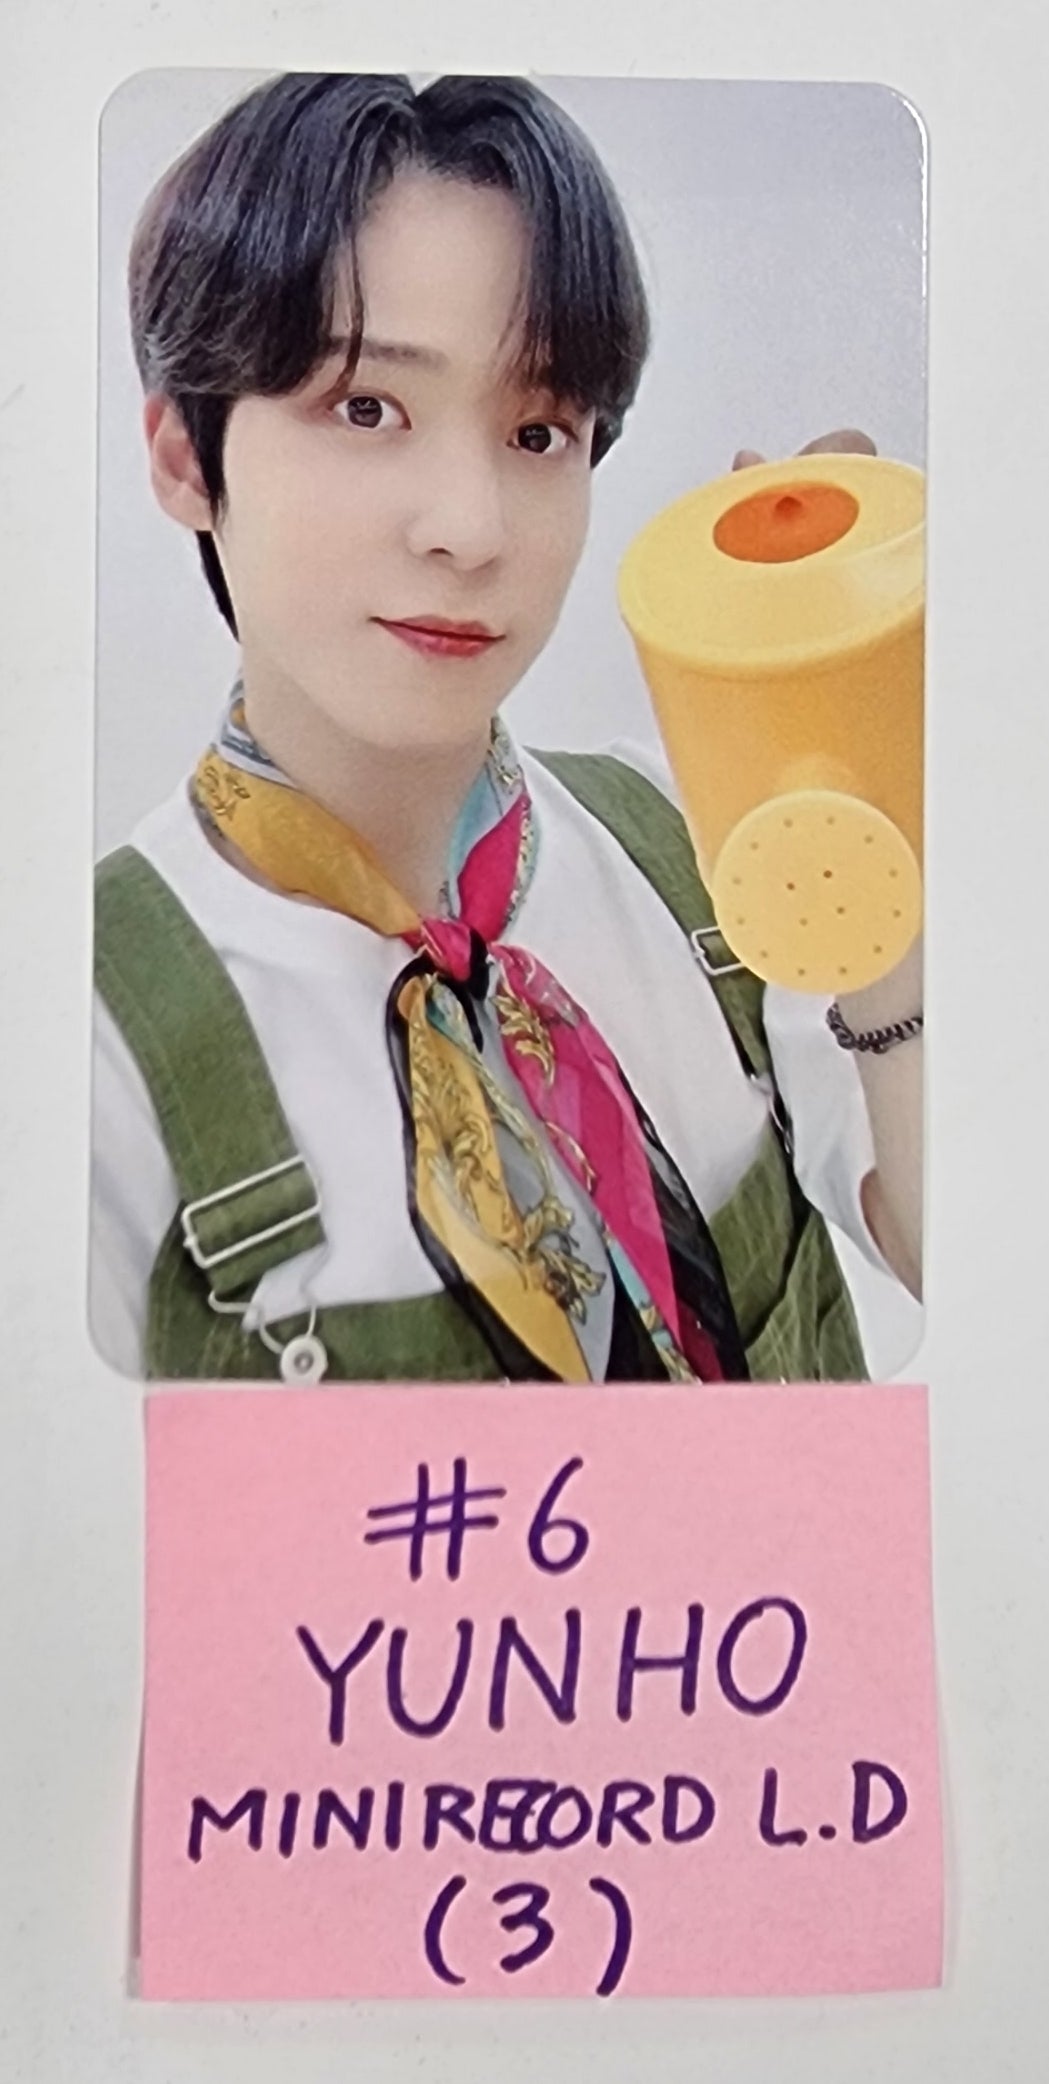 ATEEZ "THE WORLD EP.2 " - Mini Record Lucky Draw Event Photocard [Platfrom Ver.]